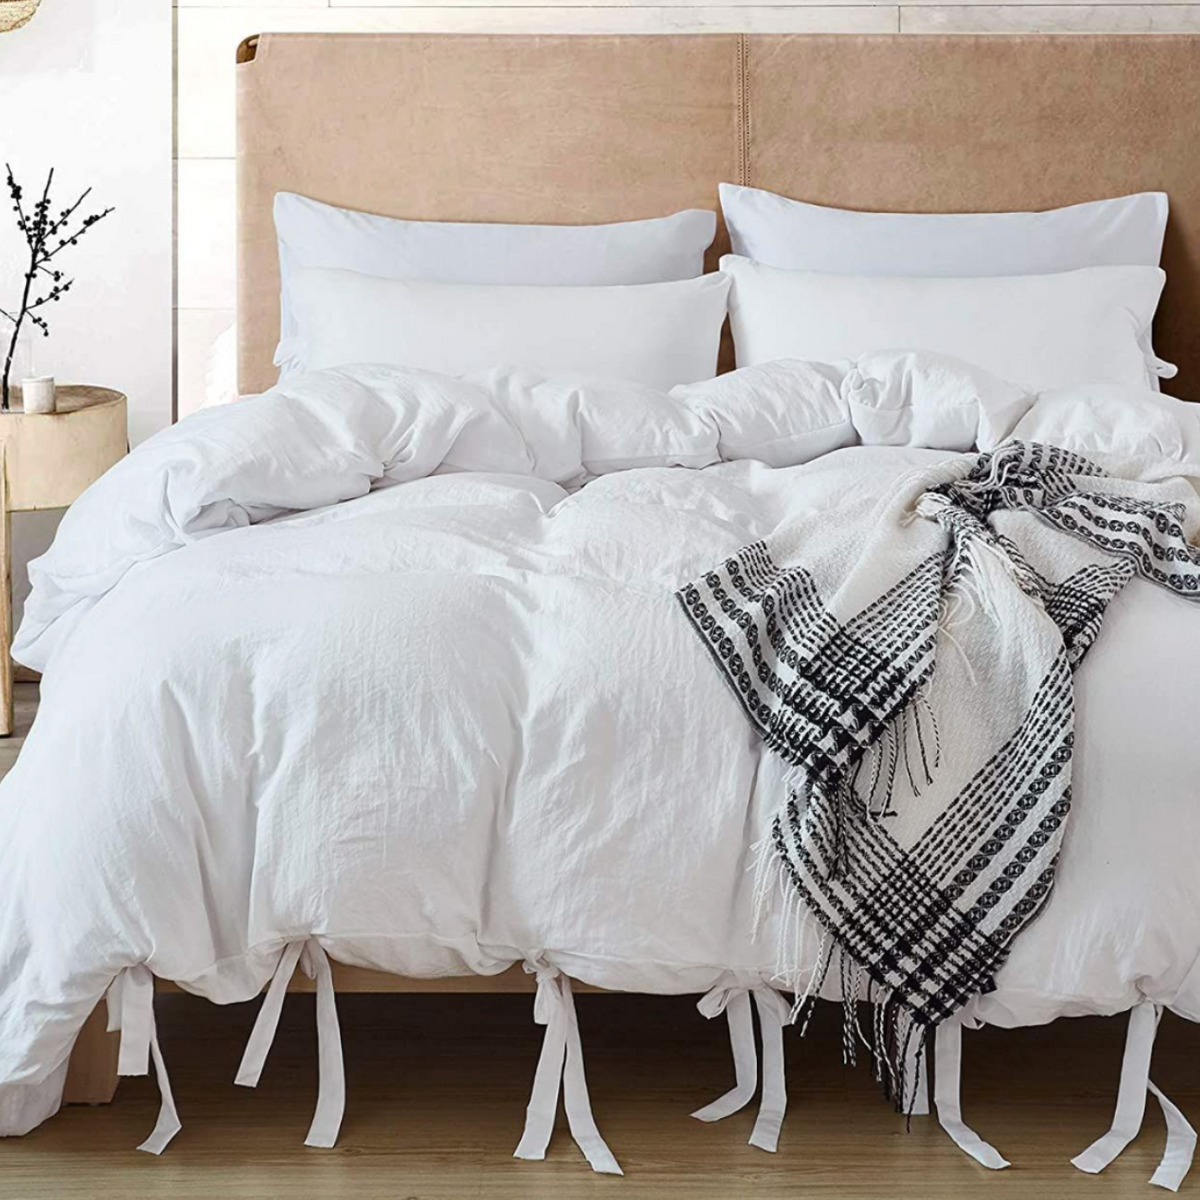 20 Best Duvet Covers 2021 The Strategist, How To Tie A Duvet Cover To A Down Comforter